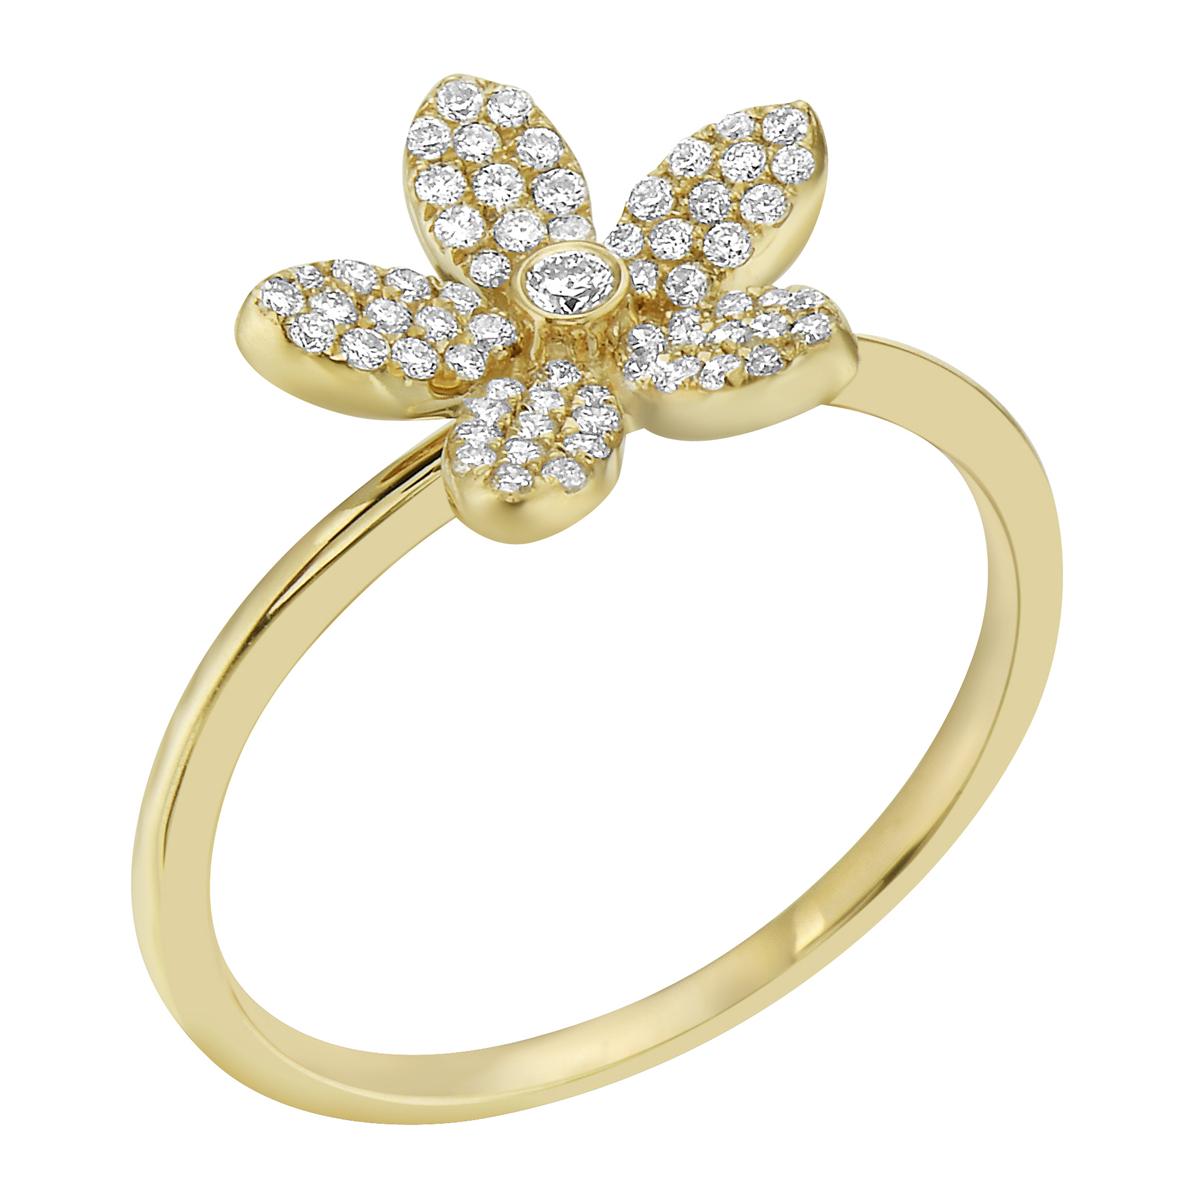 With this exquisite yellow gold diamond flower ring, style and glamour are in the spotlight. This 14 karat yellow gold ring is made from 1.8 grams of gold and is covered in 66 round SI1-SI2, GH color diamonds totaling 0.25ct. This ring is size 6.5.